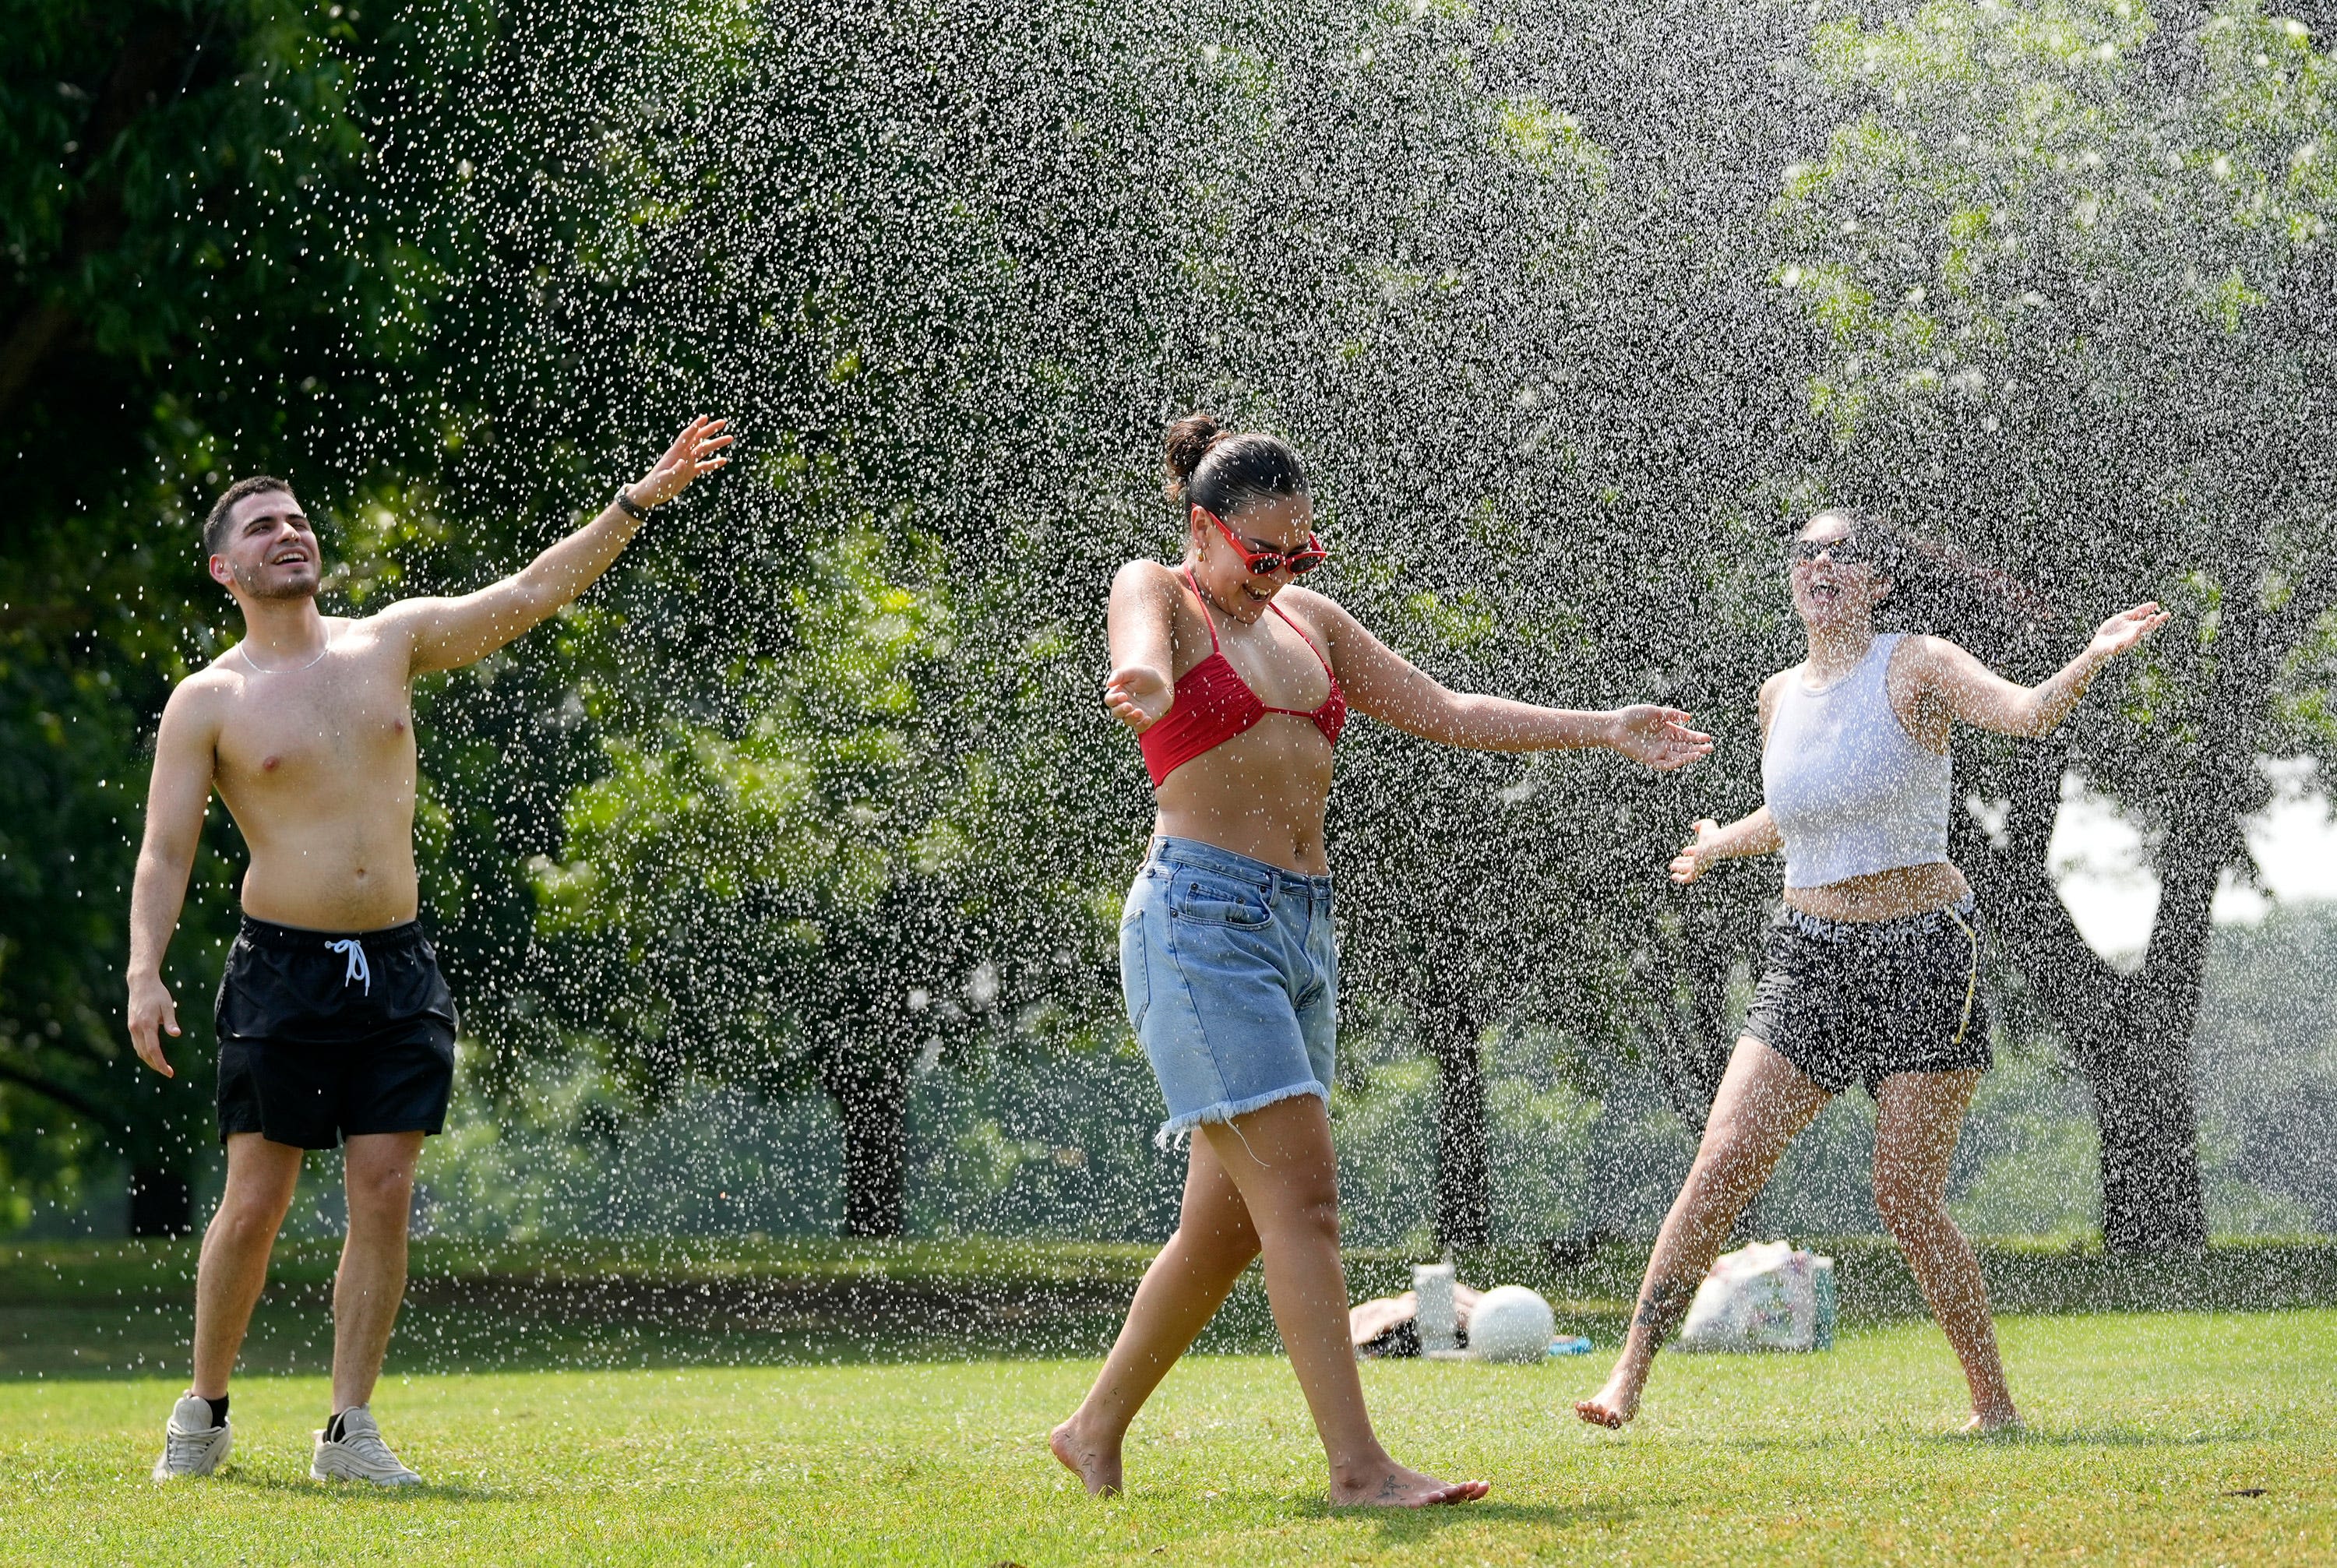 Heat-related illnesses rising in Austin amid climate change, officials say